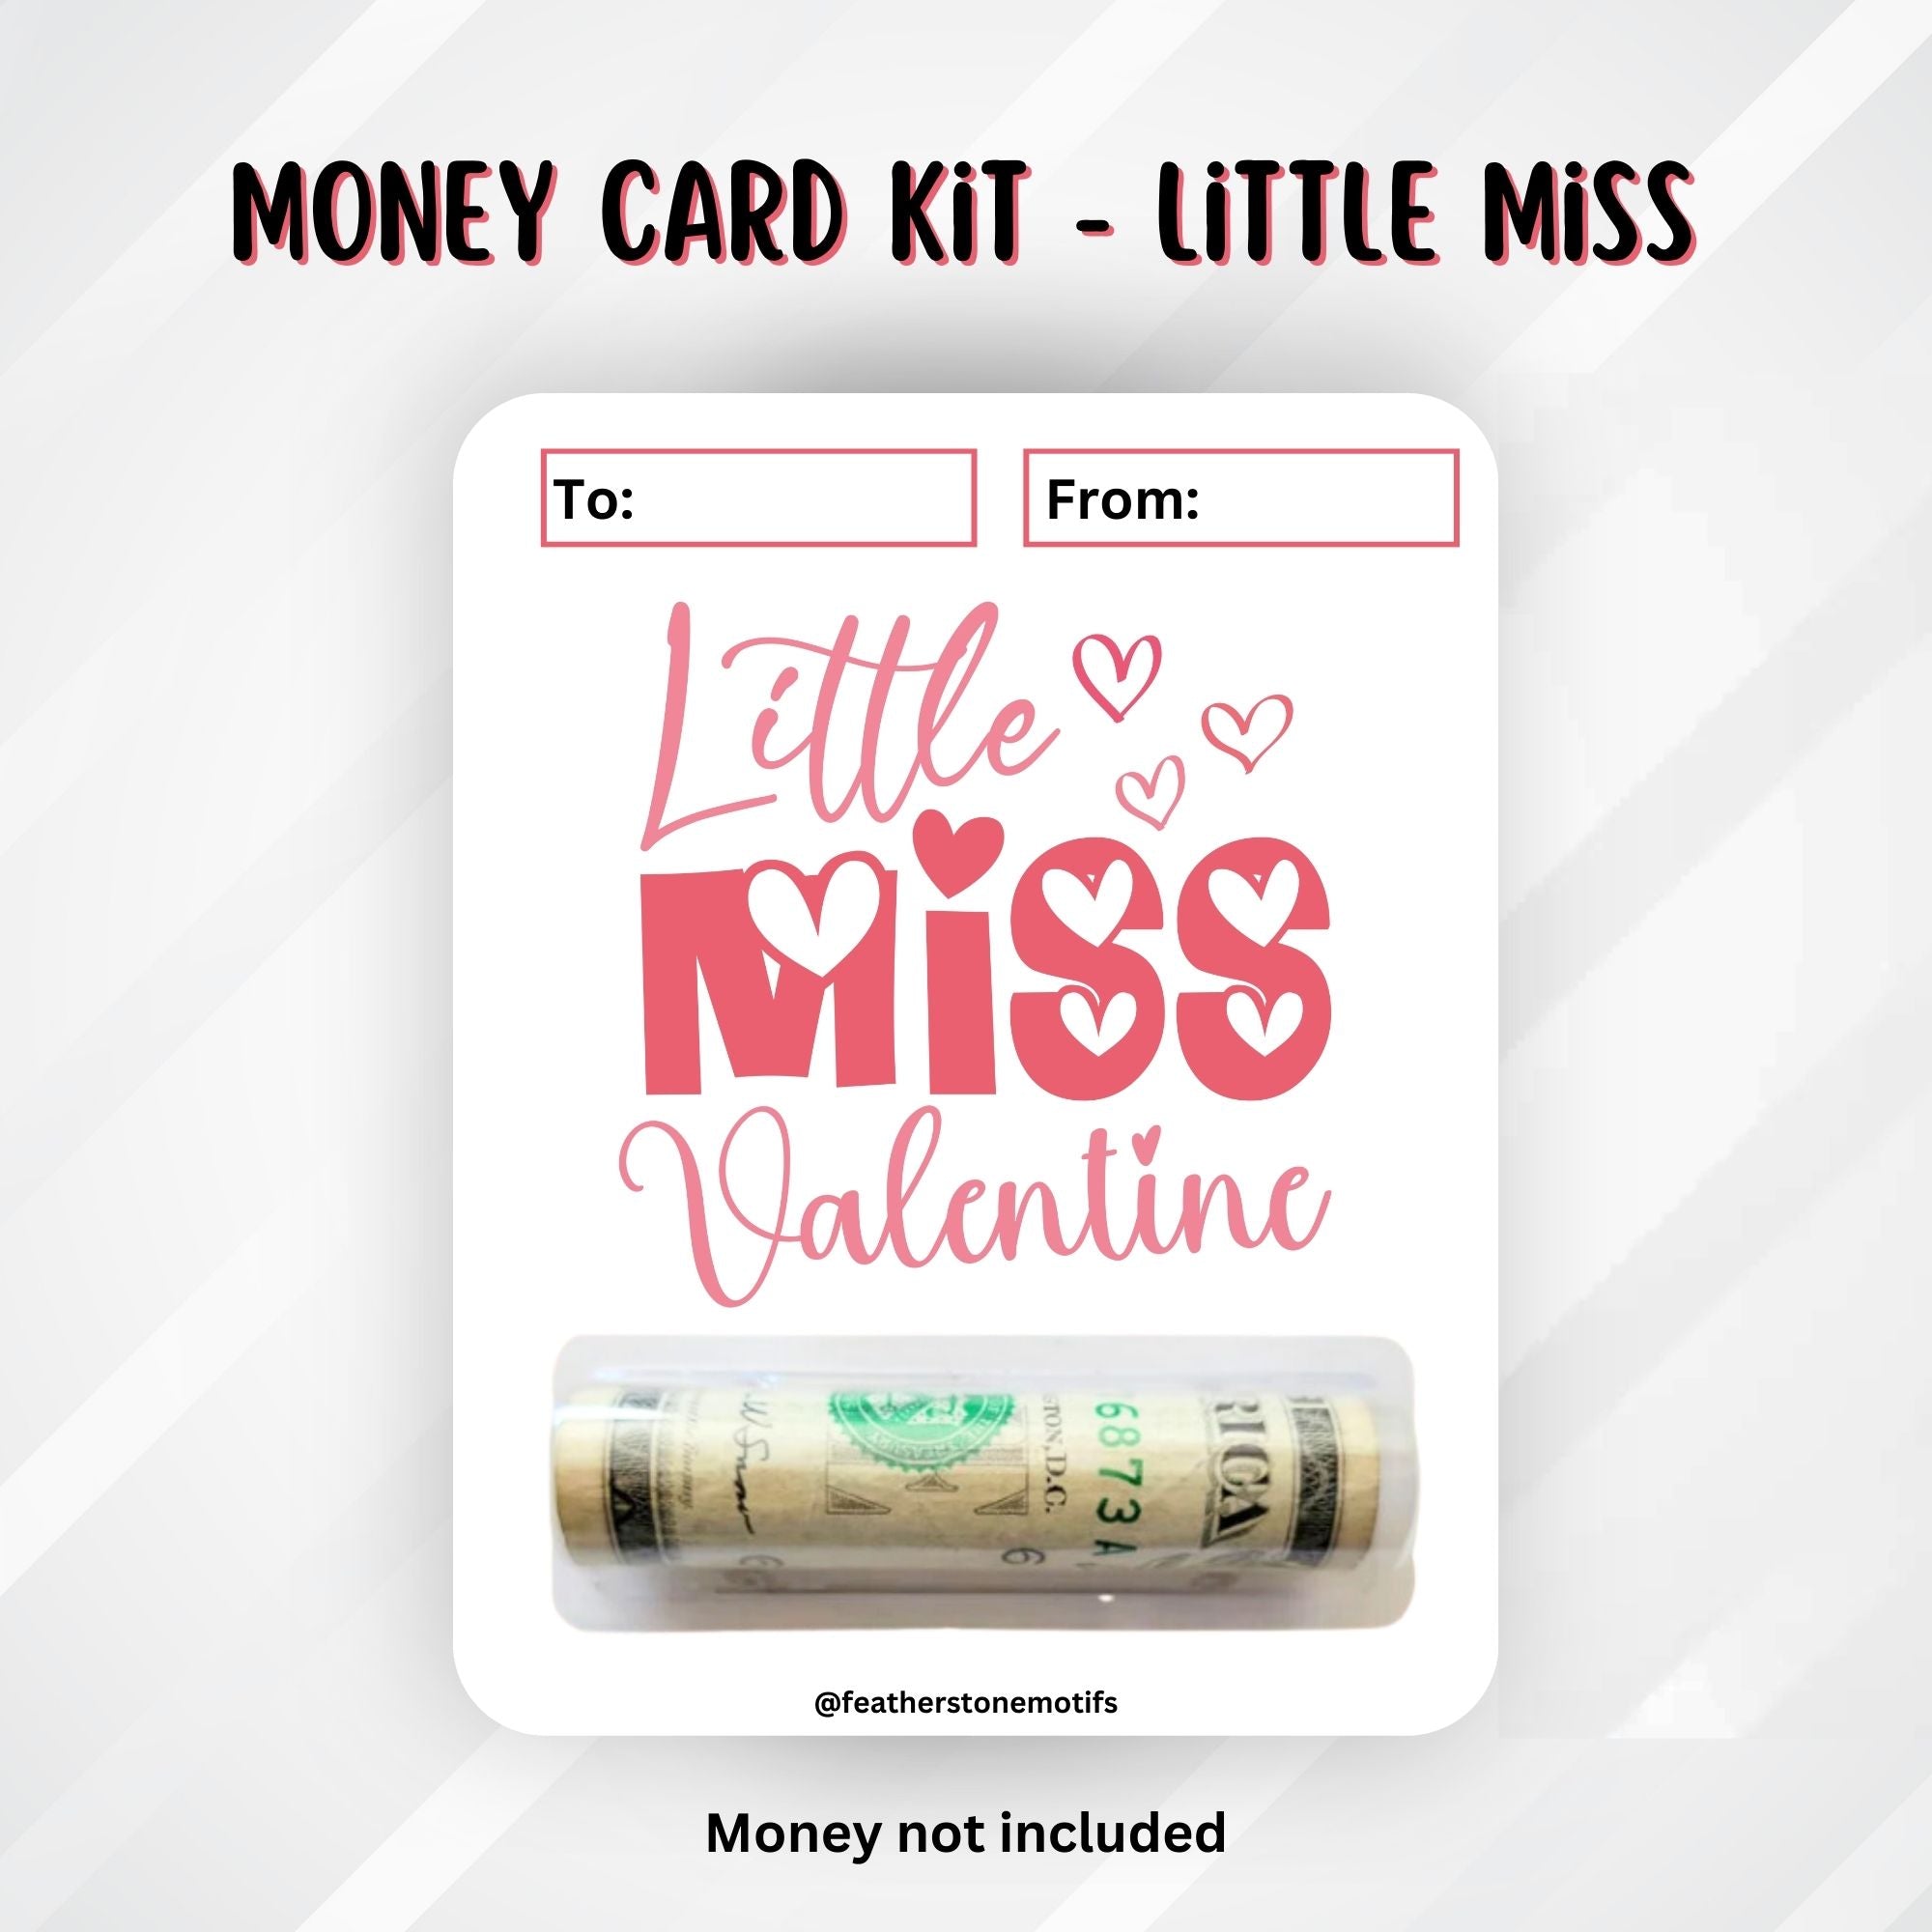 This image shows the money tube attached to the Little Miss Valentine Money Card.